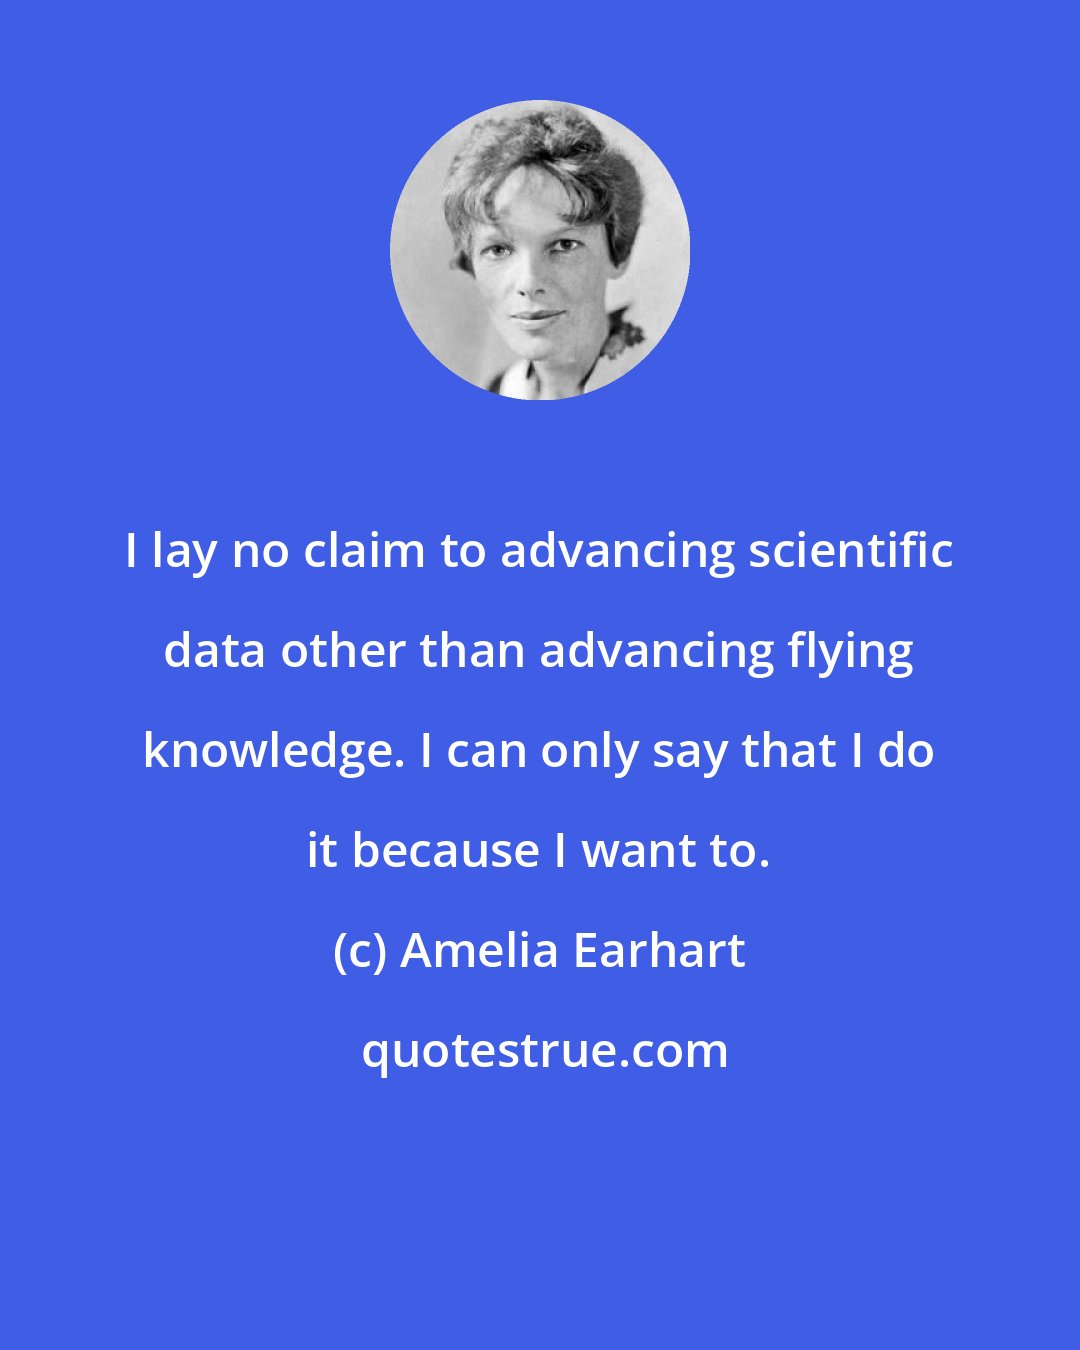 Amelia Earhart: I lay no claim to advancing scientific data other than advancing flying knowledge. I can only say that I do it because I want to.